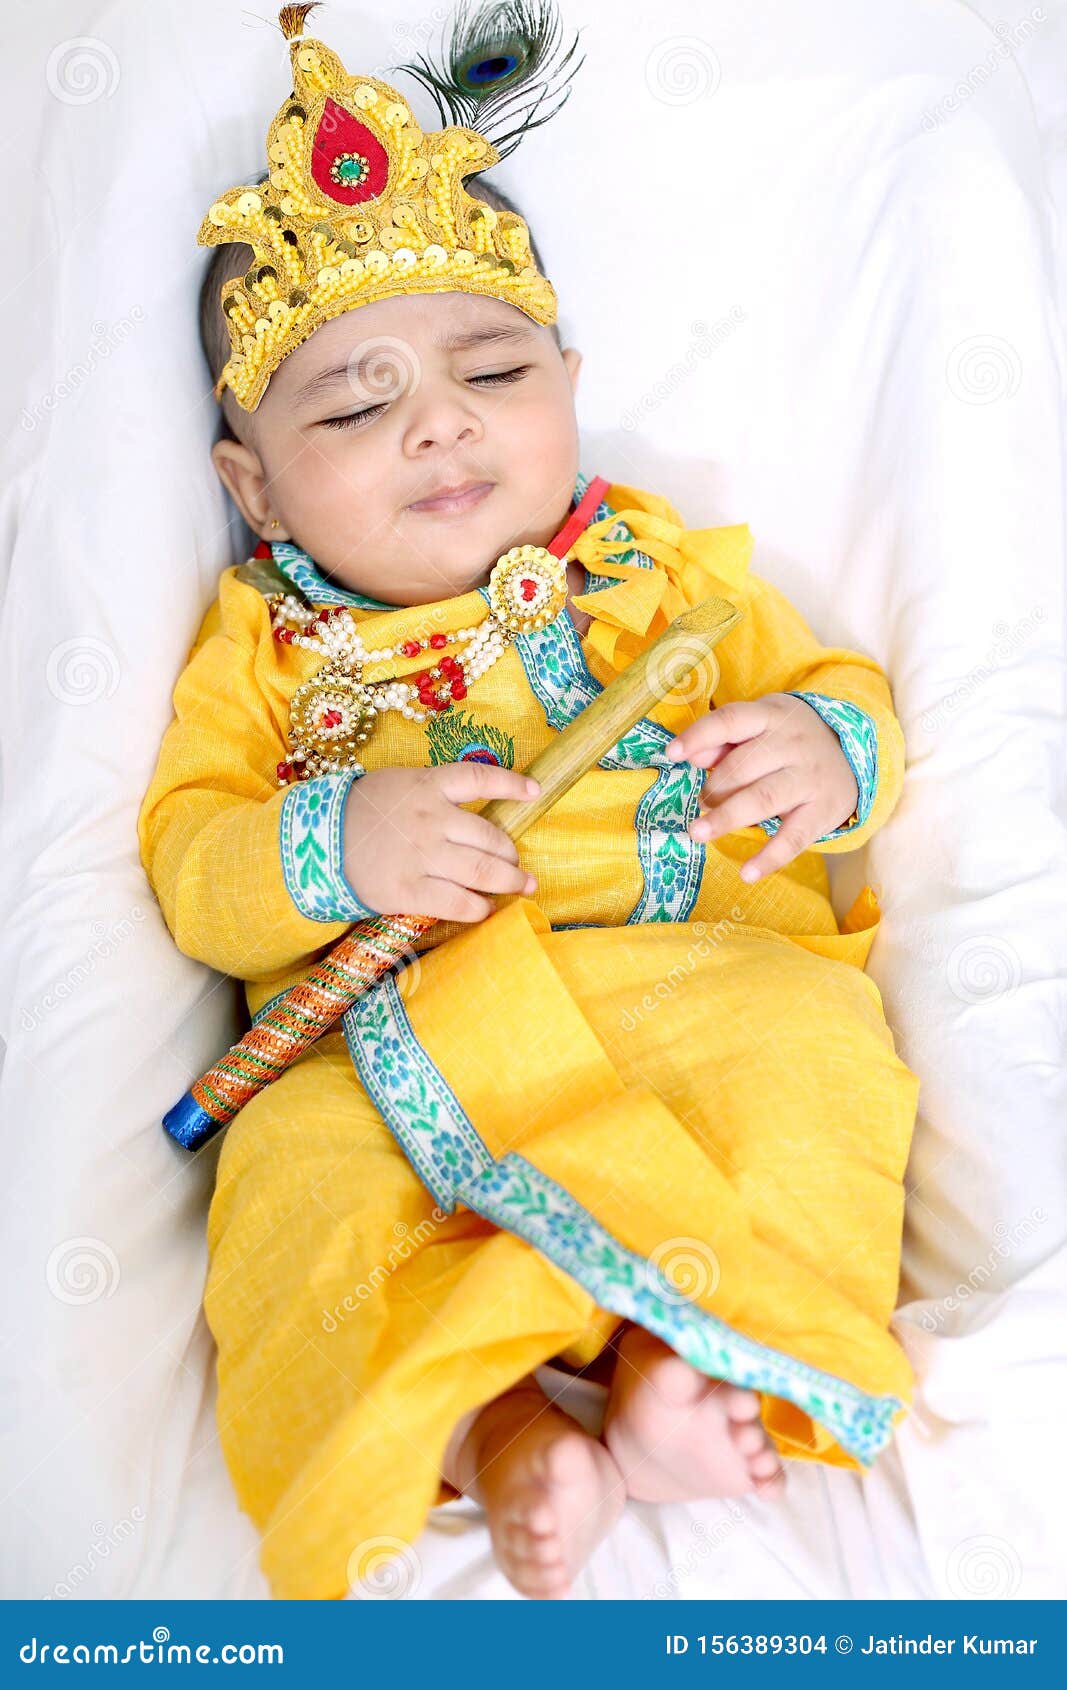 Picture of Baby krishna. stock photo. Image of crown - 156389304